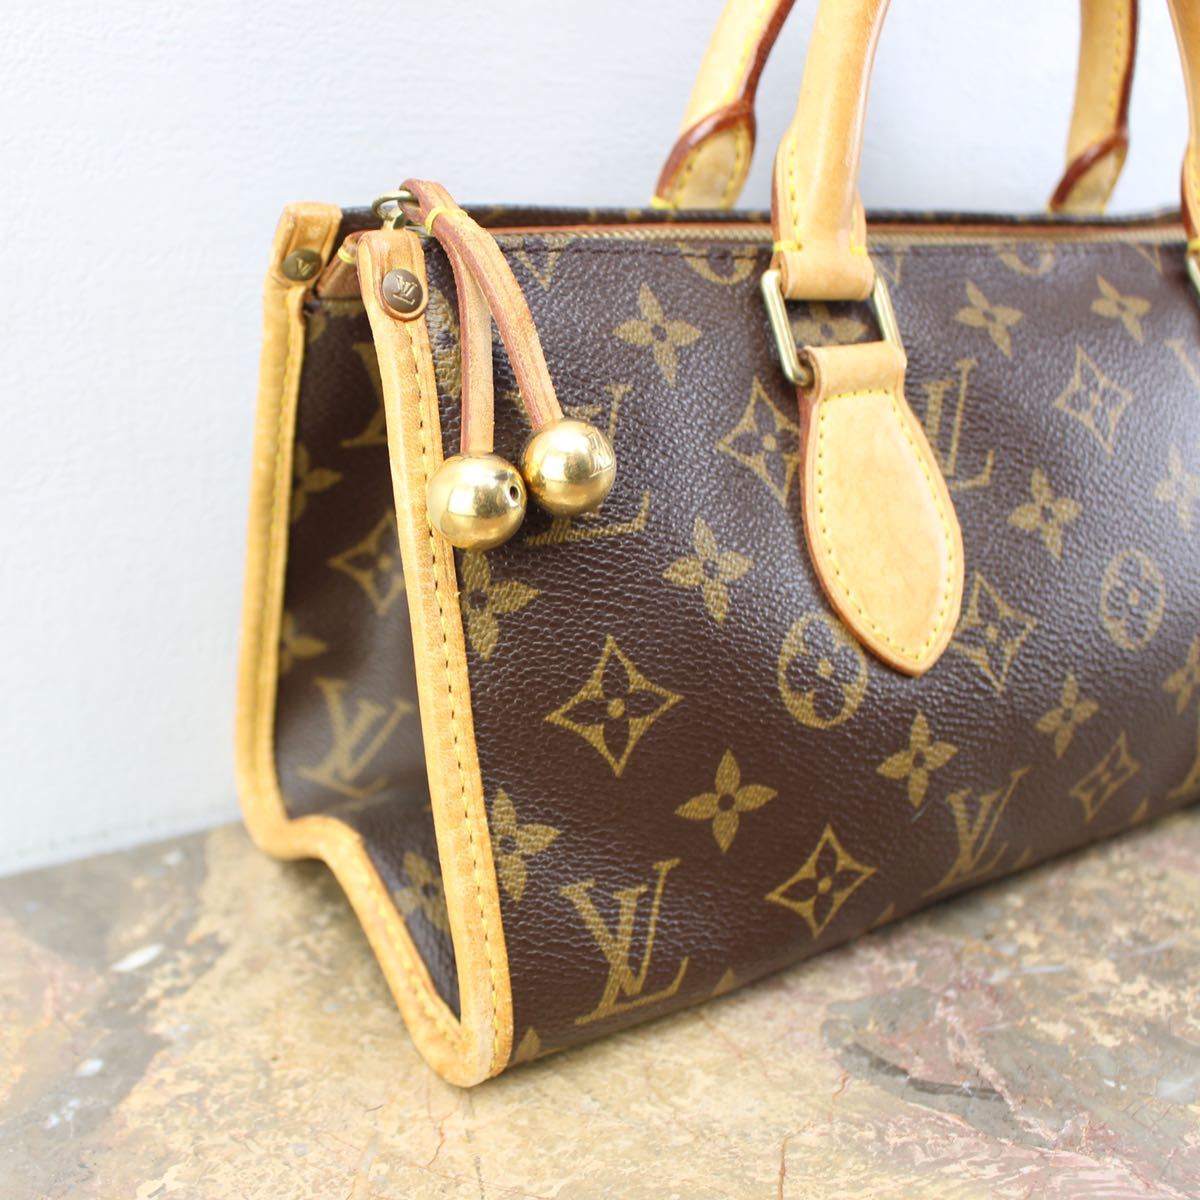 LOUIS VUITTON M40009 VI0036 MONOGRAM PATTERNED HAND BAG MADE IN 